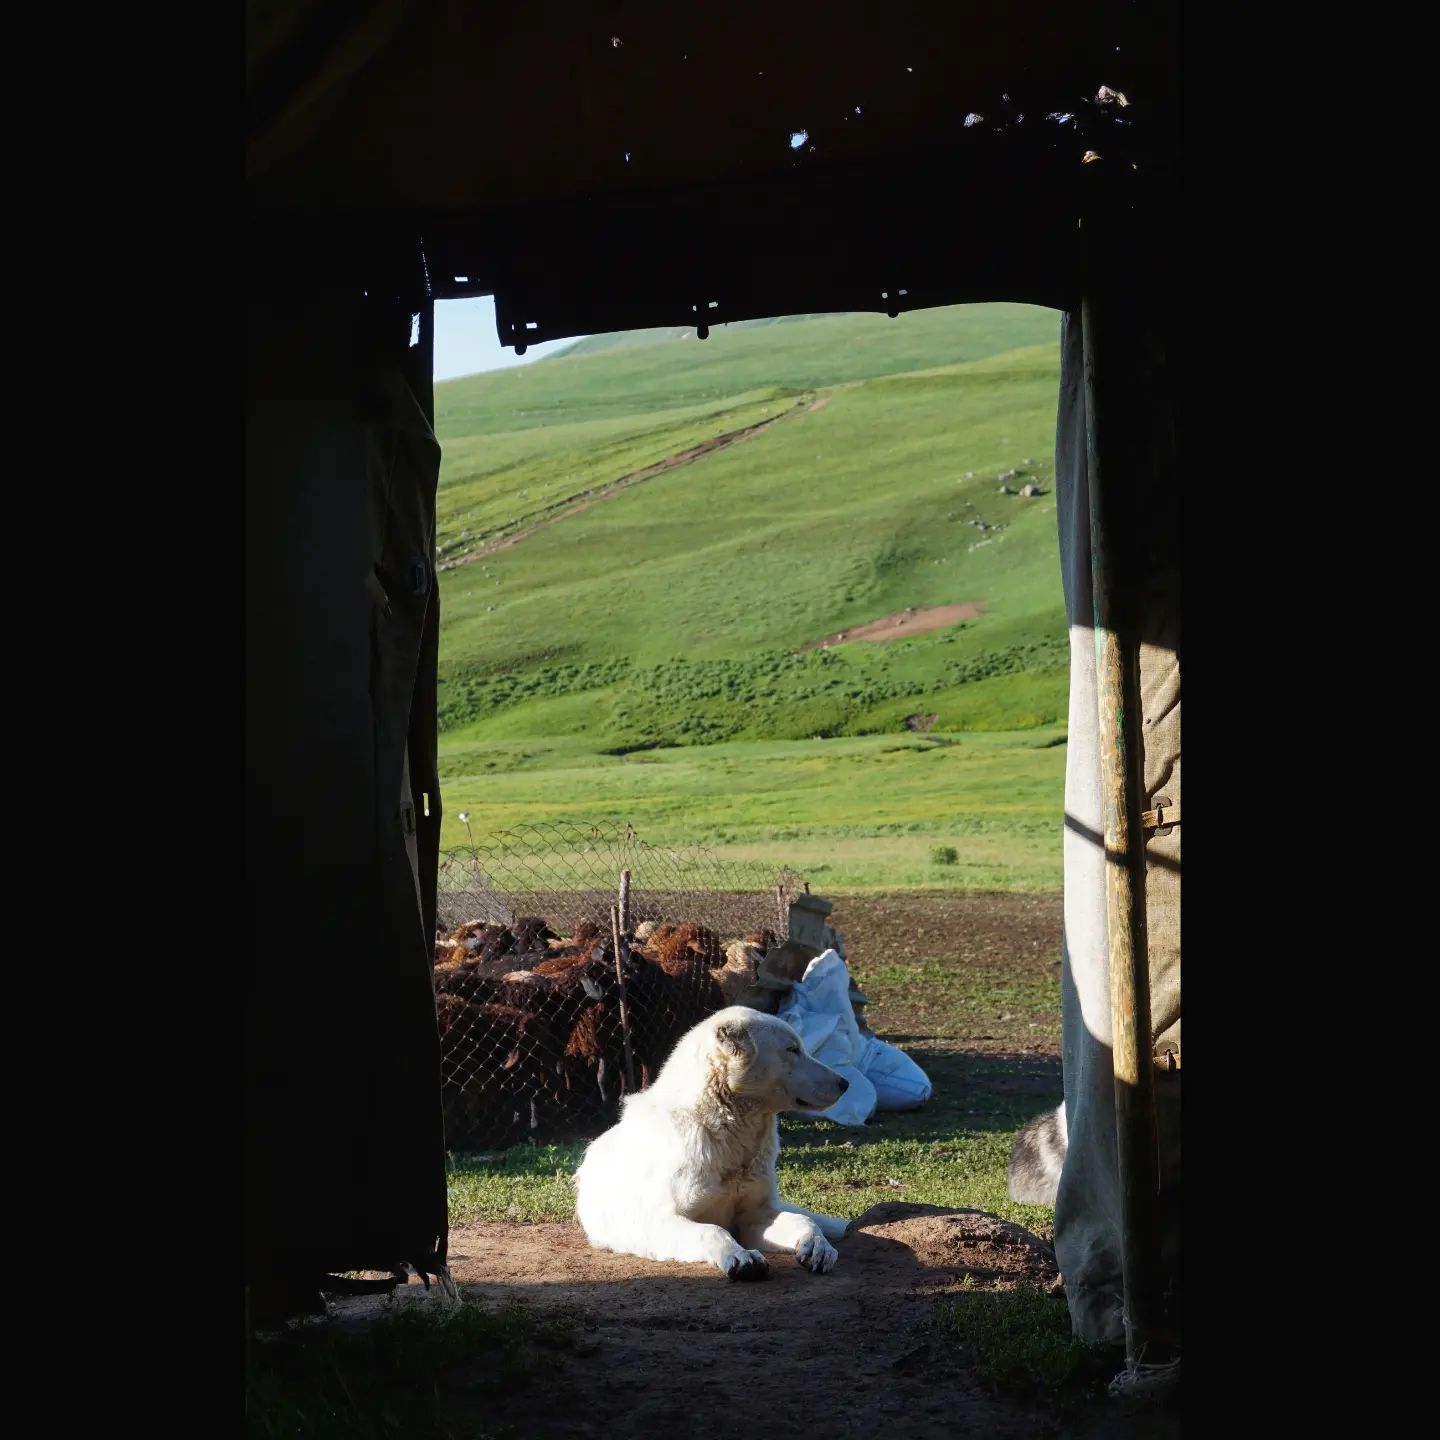 A photograph looking out through the door of a nomad tent towards a sheepdog sitting in the doorway with a sheep pen and grassy hill in the background.